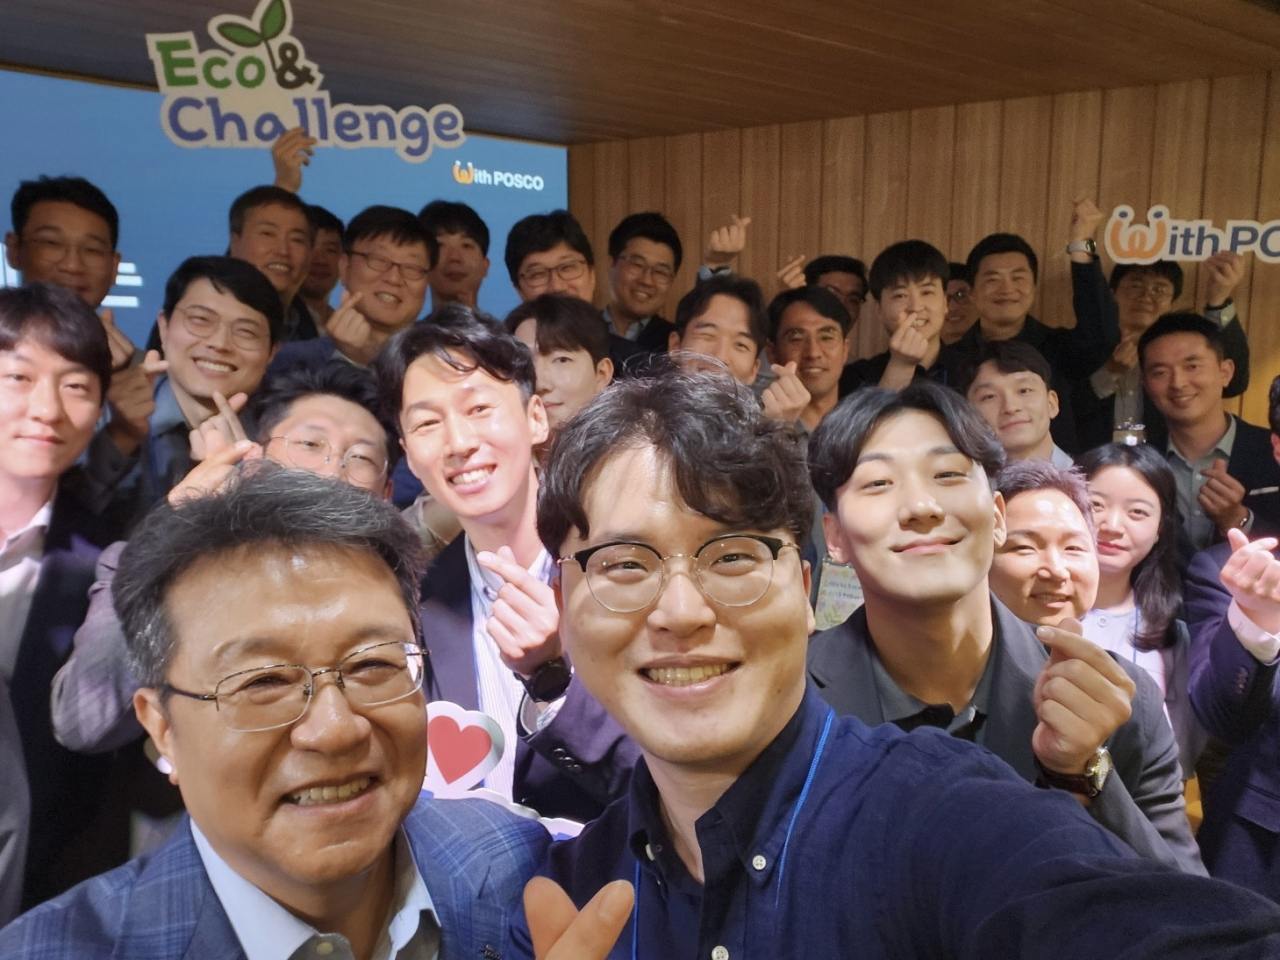 Posco E&C President Han Sung-hee (left) poses with employees for a group photo during a May company meeting where he shared the Eco & Challenge vision. (Posco Eco & Challenge)